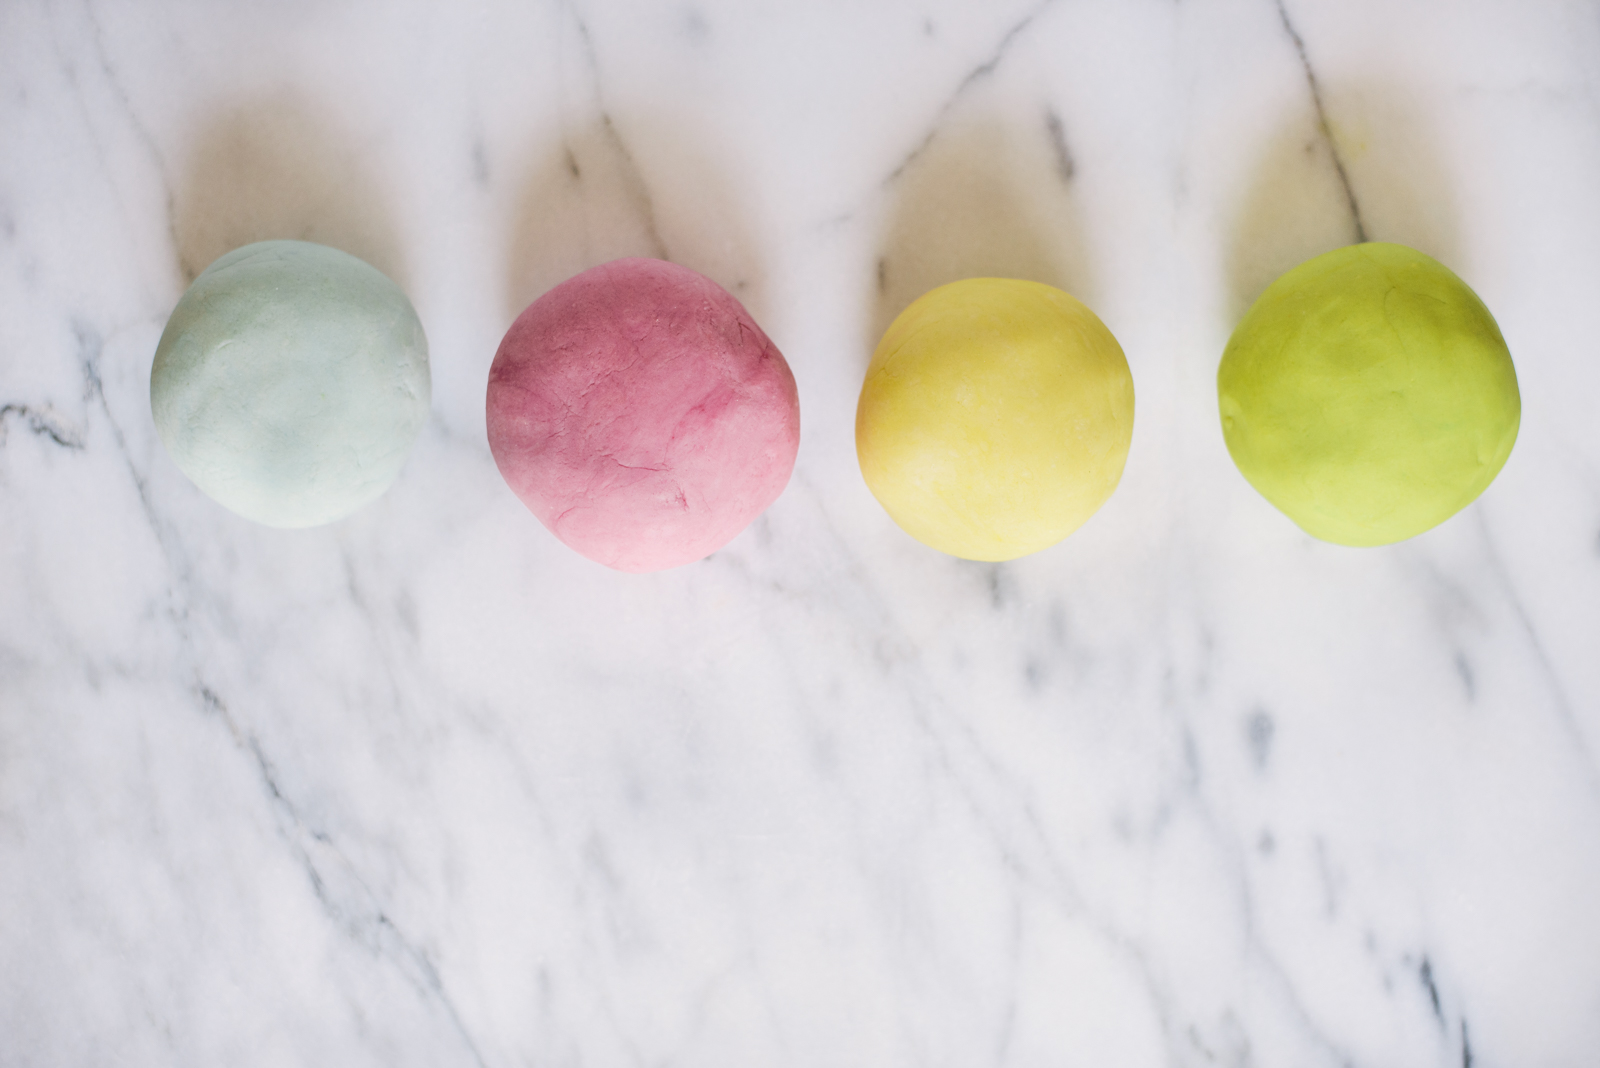 four essential oil play dough balls in natural colors on marble